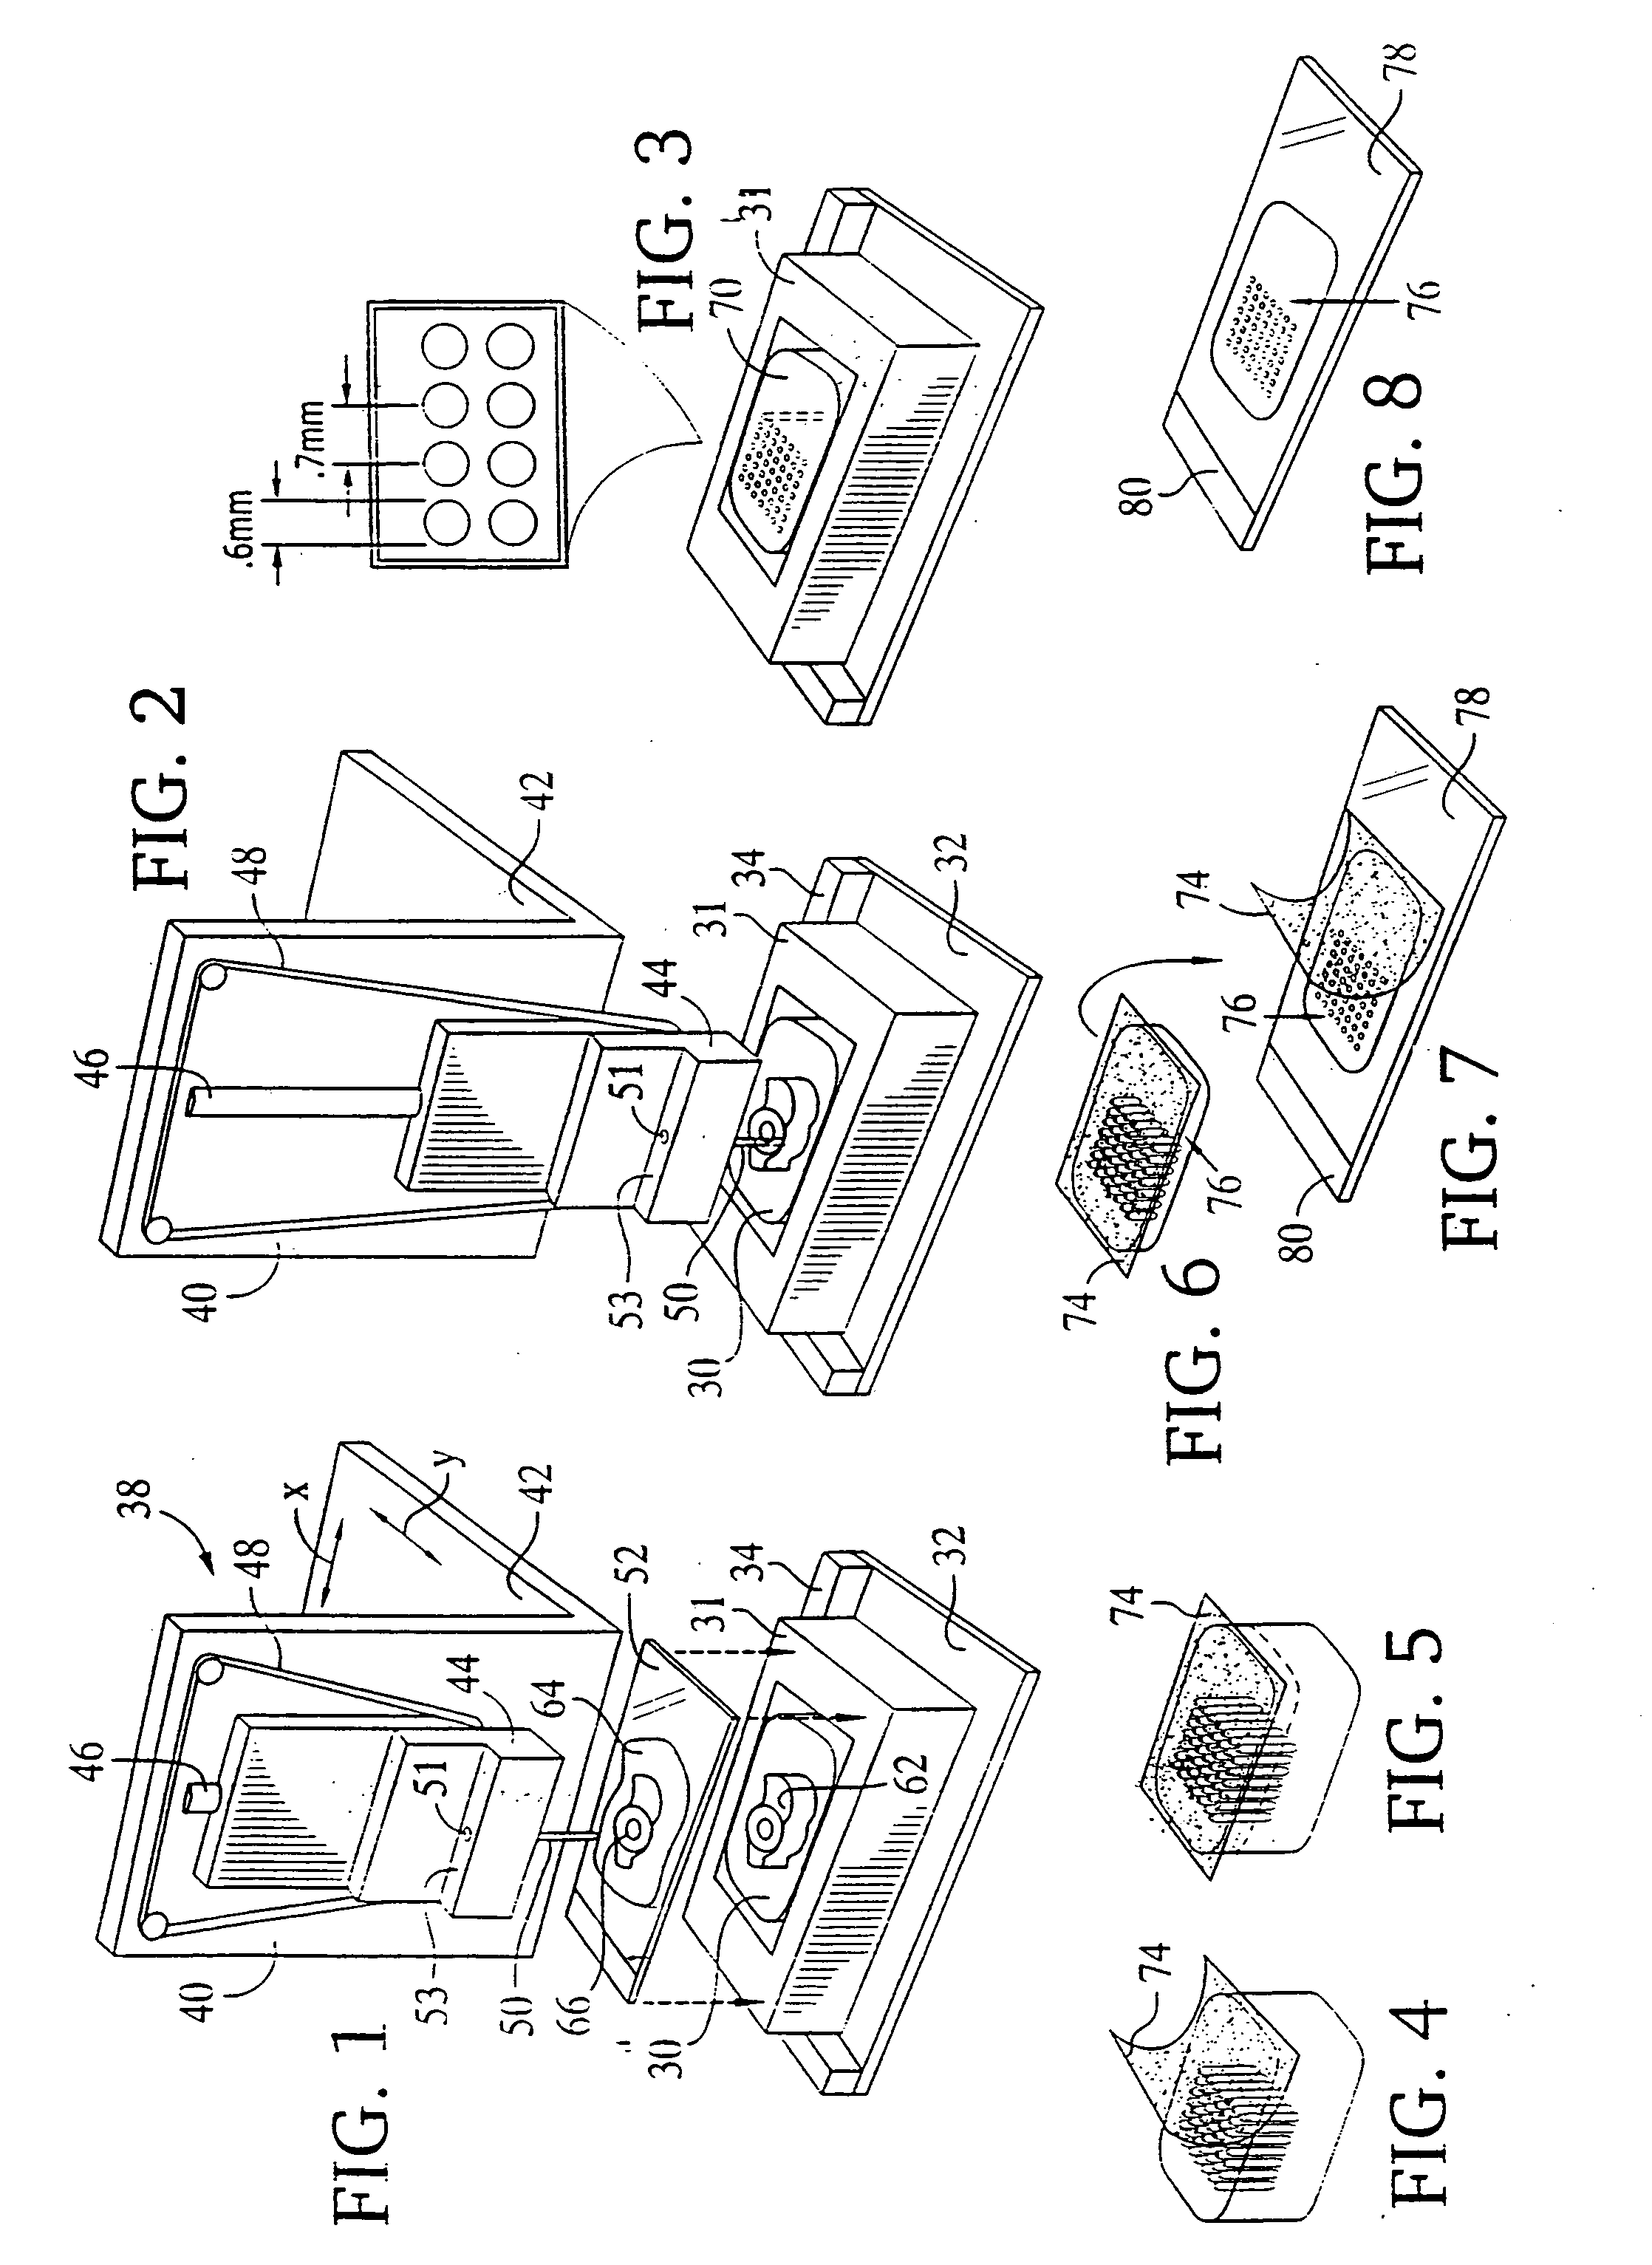 Cellular arrays and methods of detecting and using genetic disorder markers